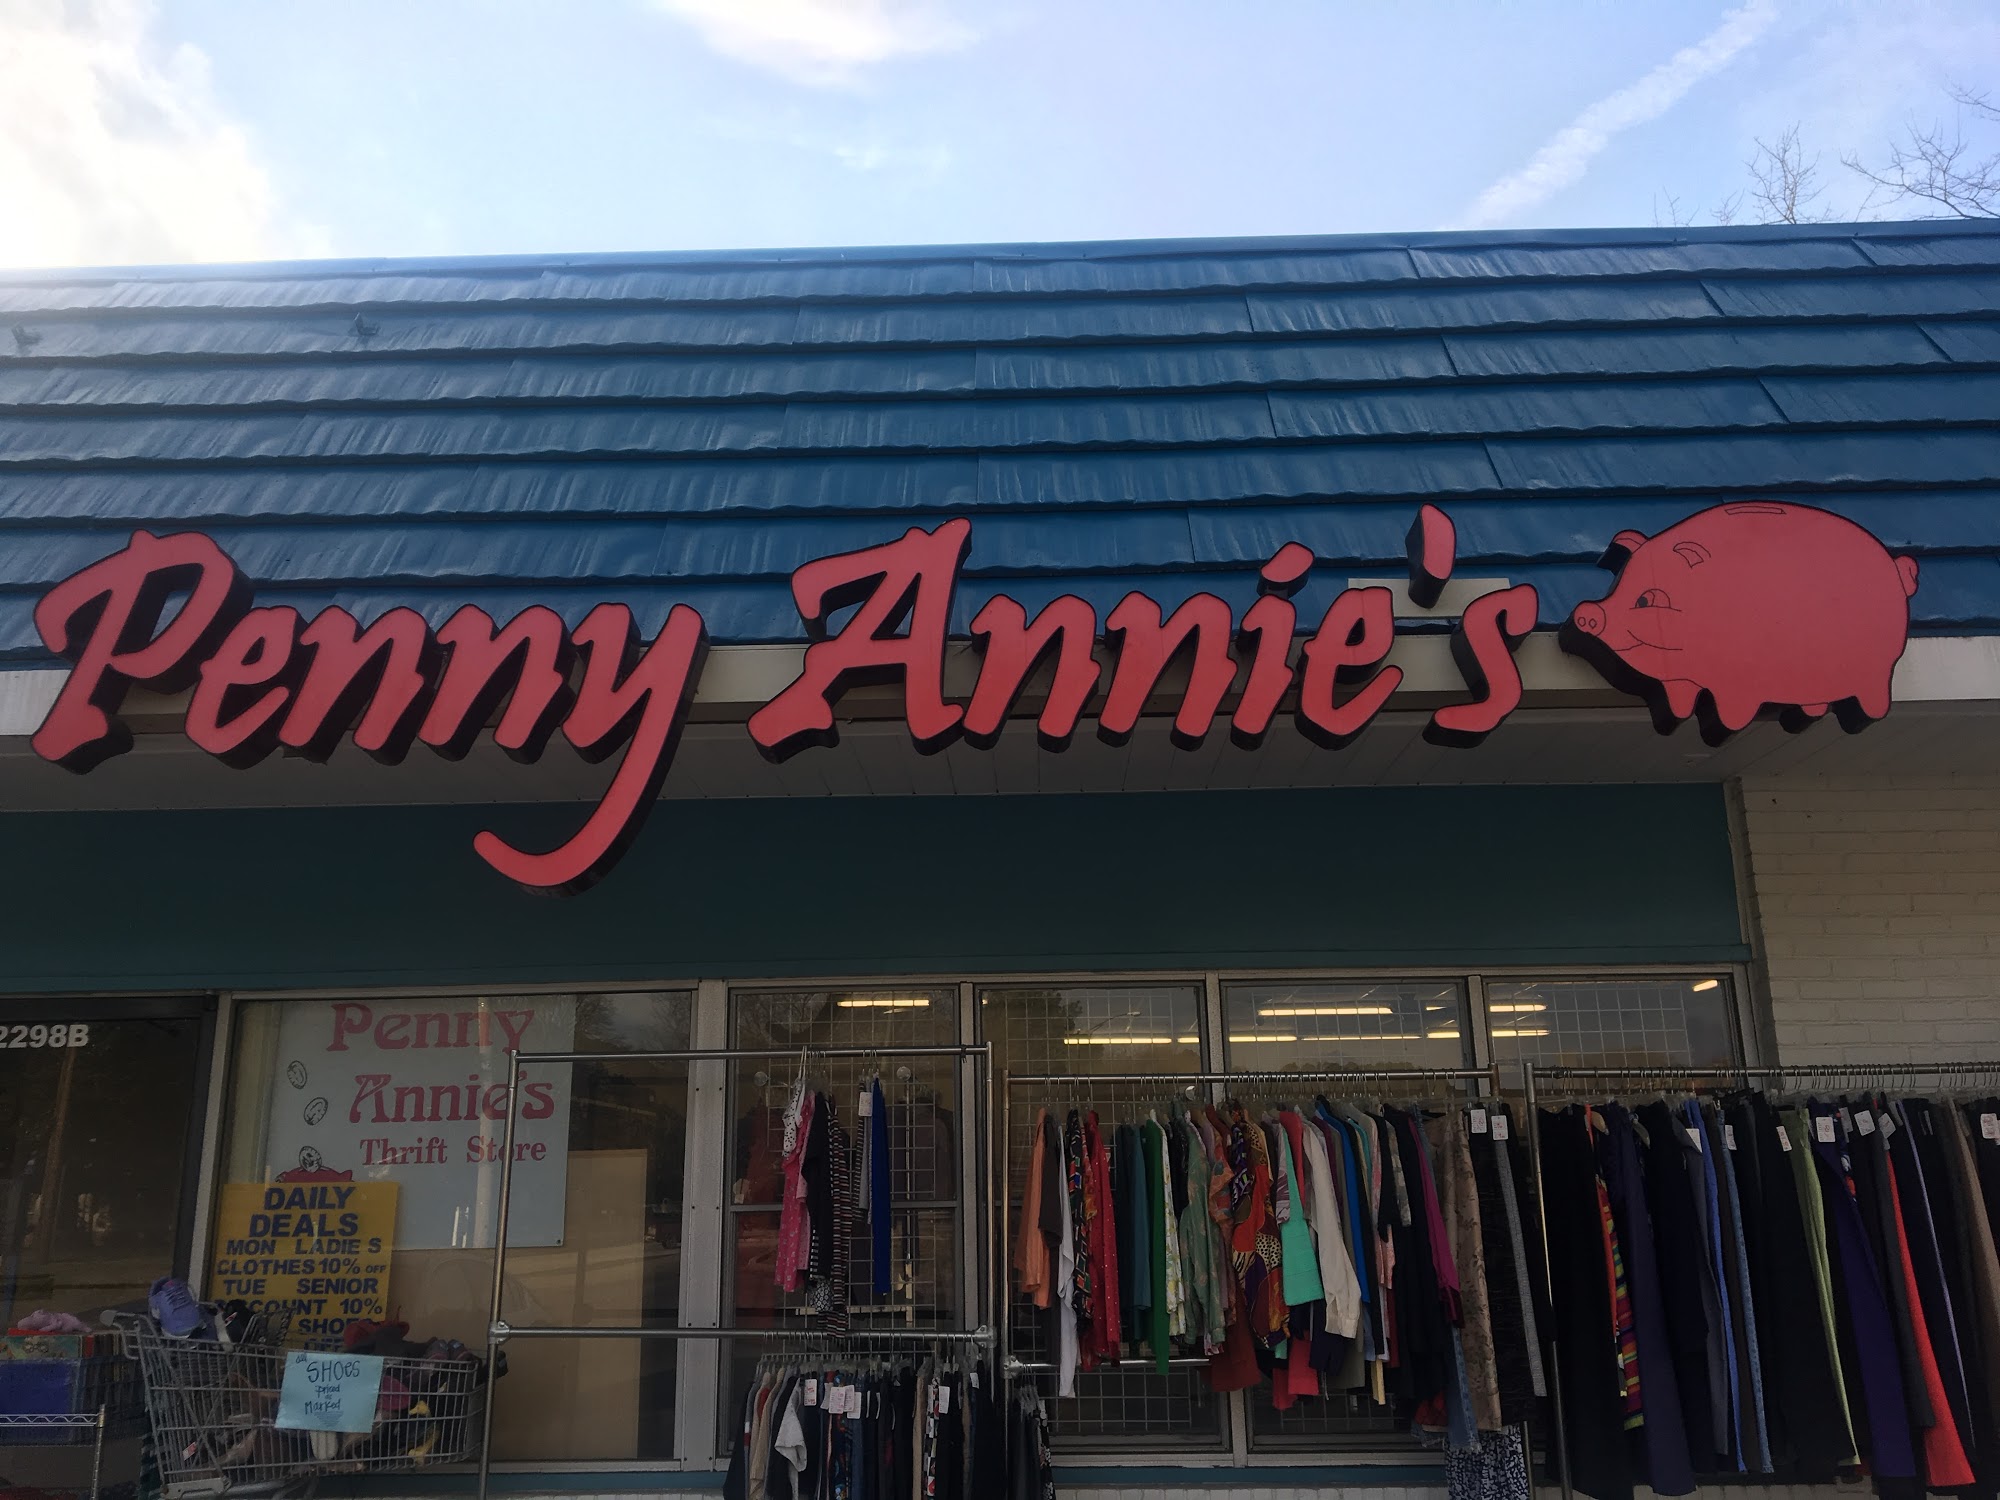 Penny Annie's